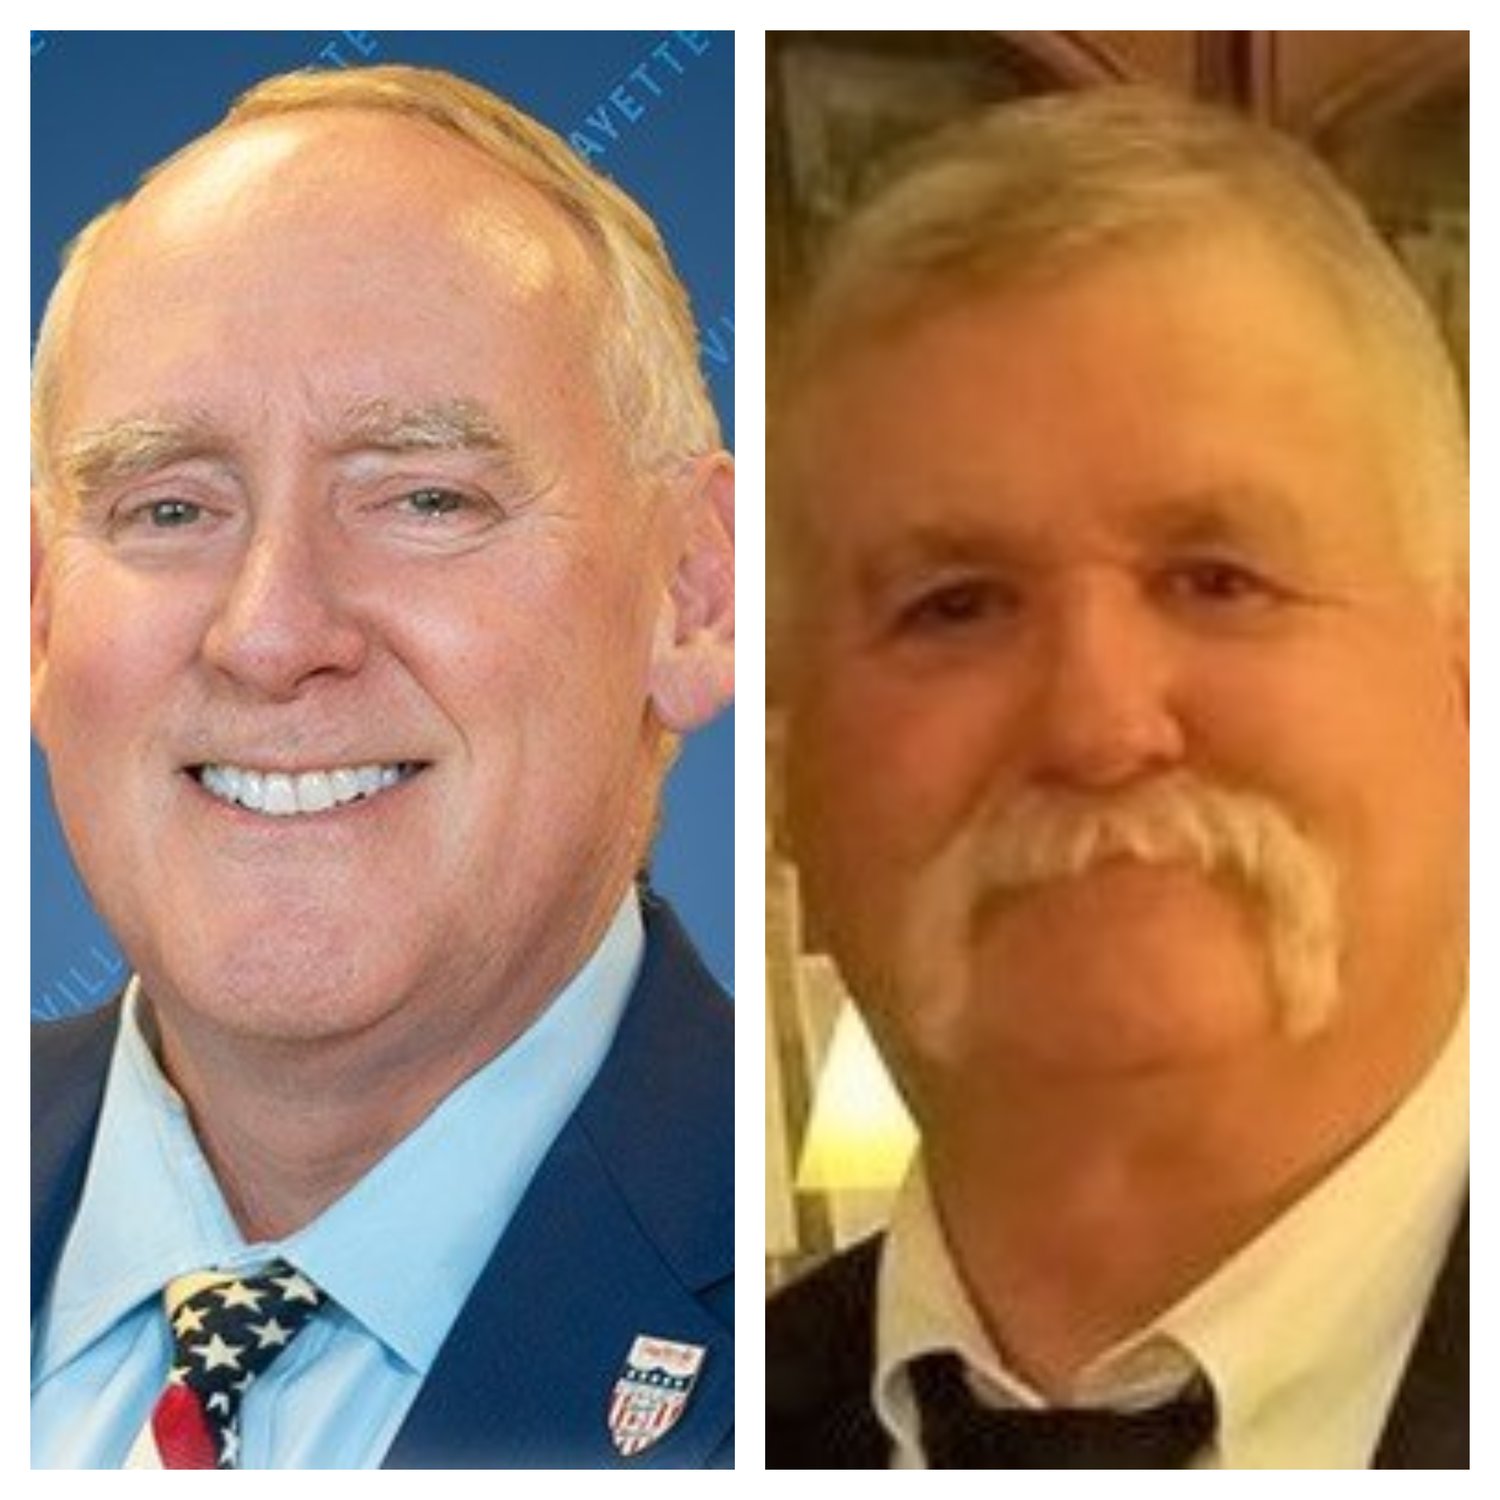 Johnny Dawkins, left, and Fred LaChance are candidates for the Fayetteville City Council representing District 5 in the July 26 election.